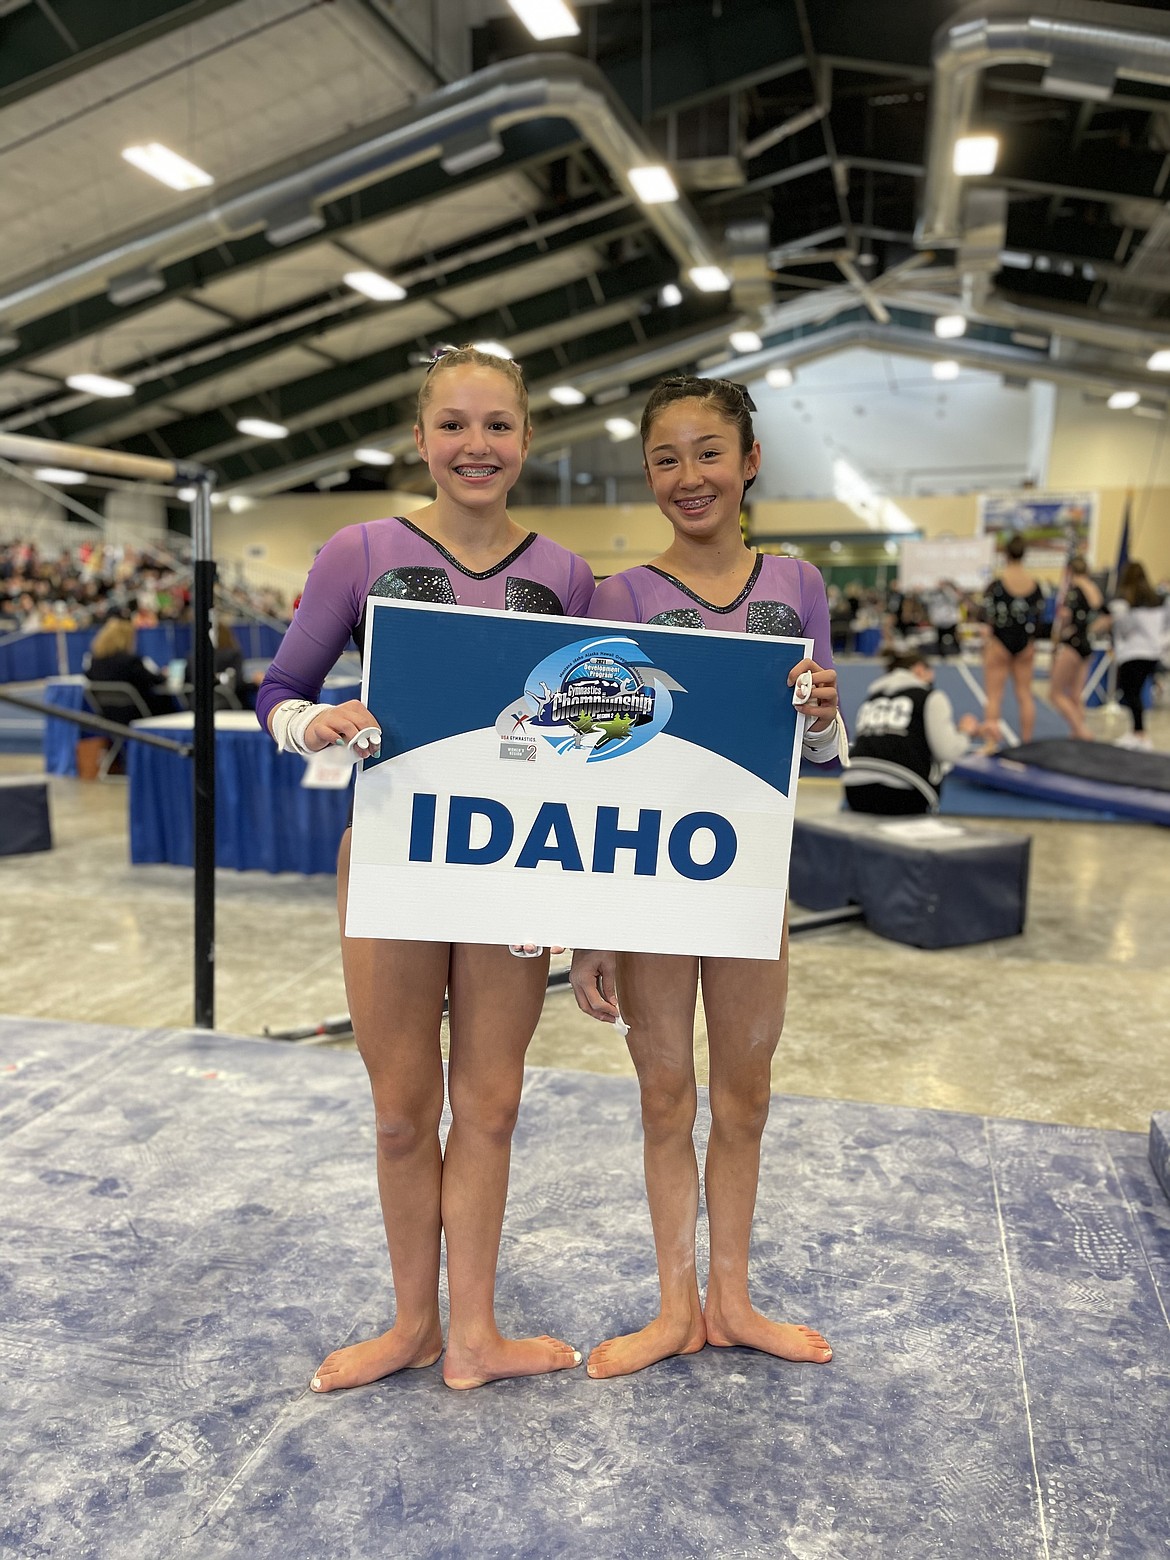 Courtesy photo
Avant Coeur Gymnastics Level 10s at the Region 2 championships in Helena, Mont. From left are Madalyn McCormick and Maiya Terry.